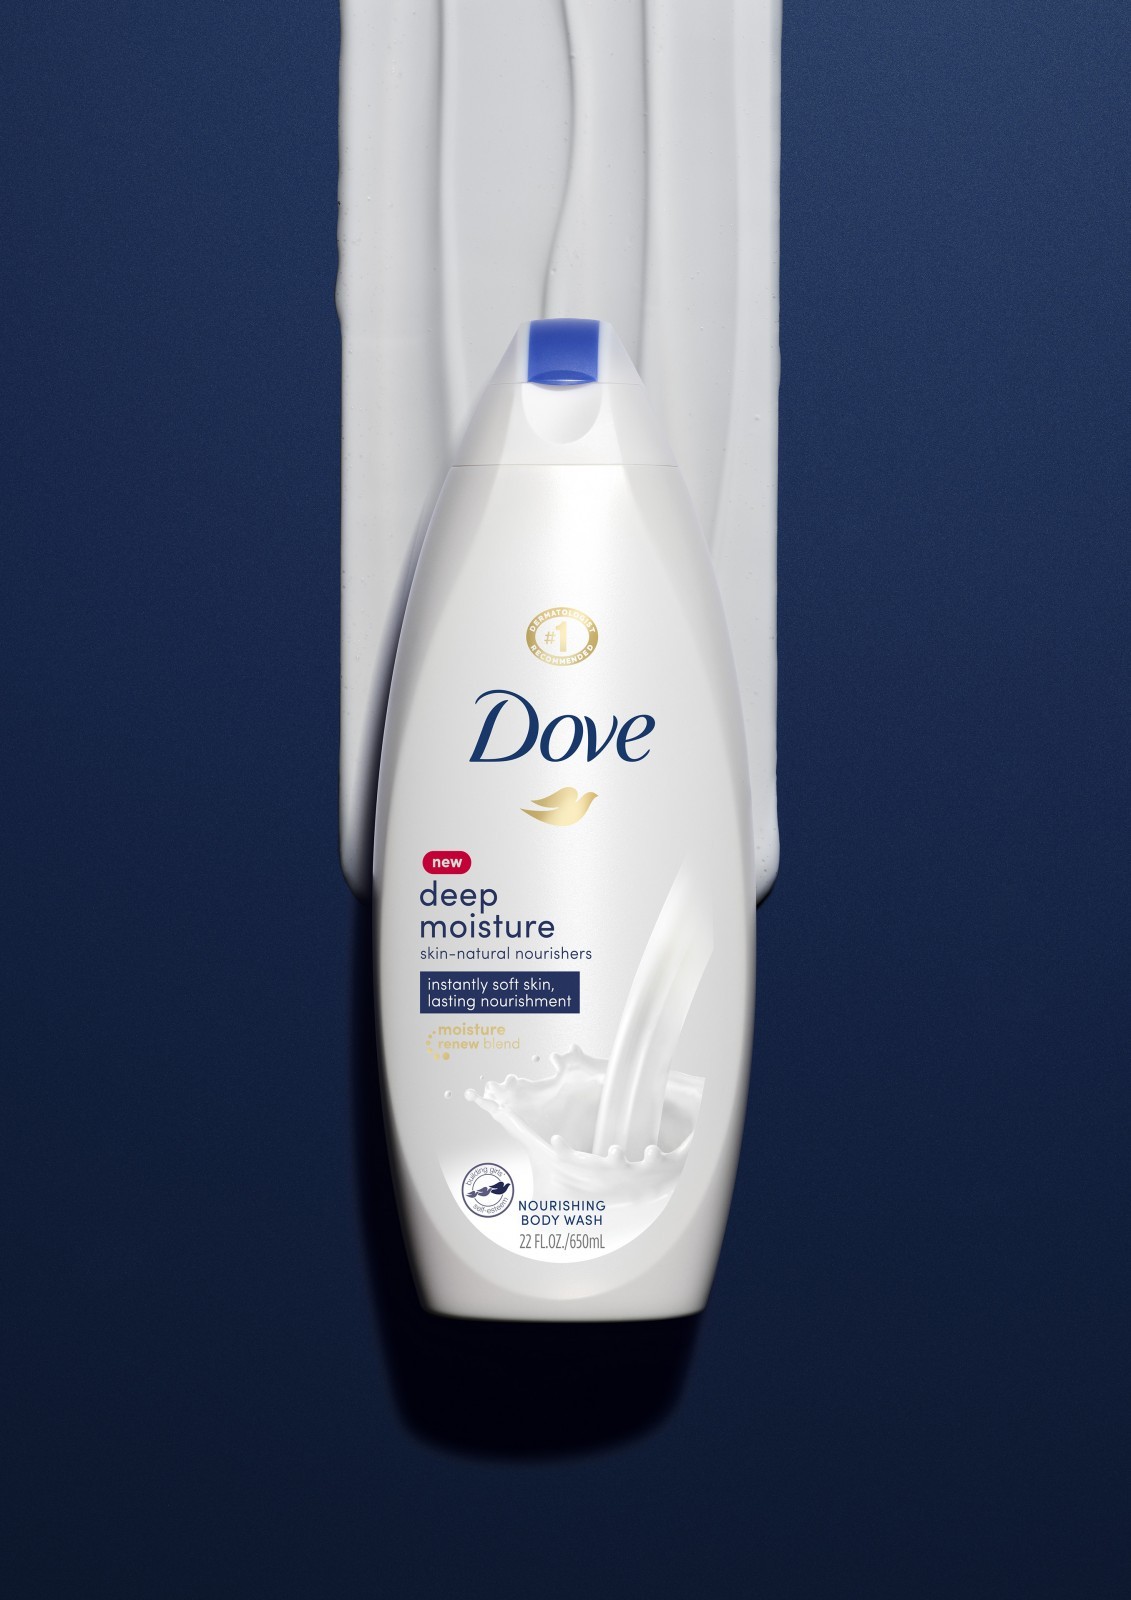 forceMAJEURE-Design-Dove-Body-Wash-Global-Relaunch3.jpg